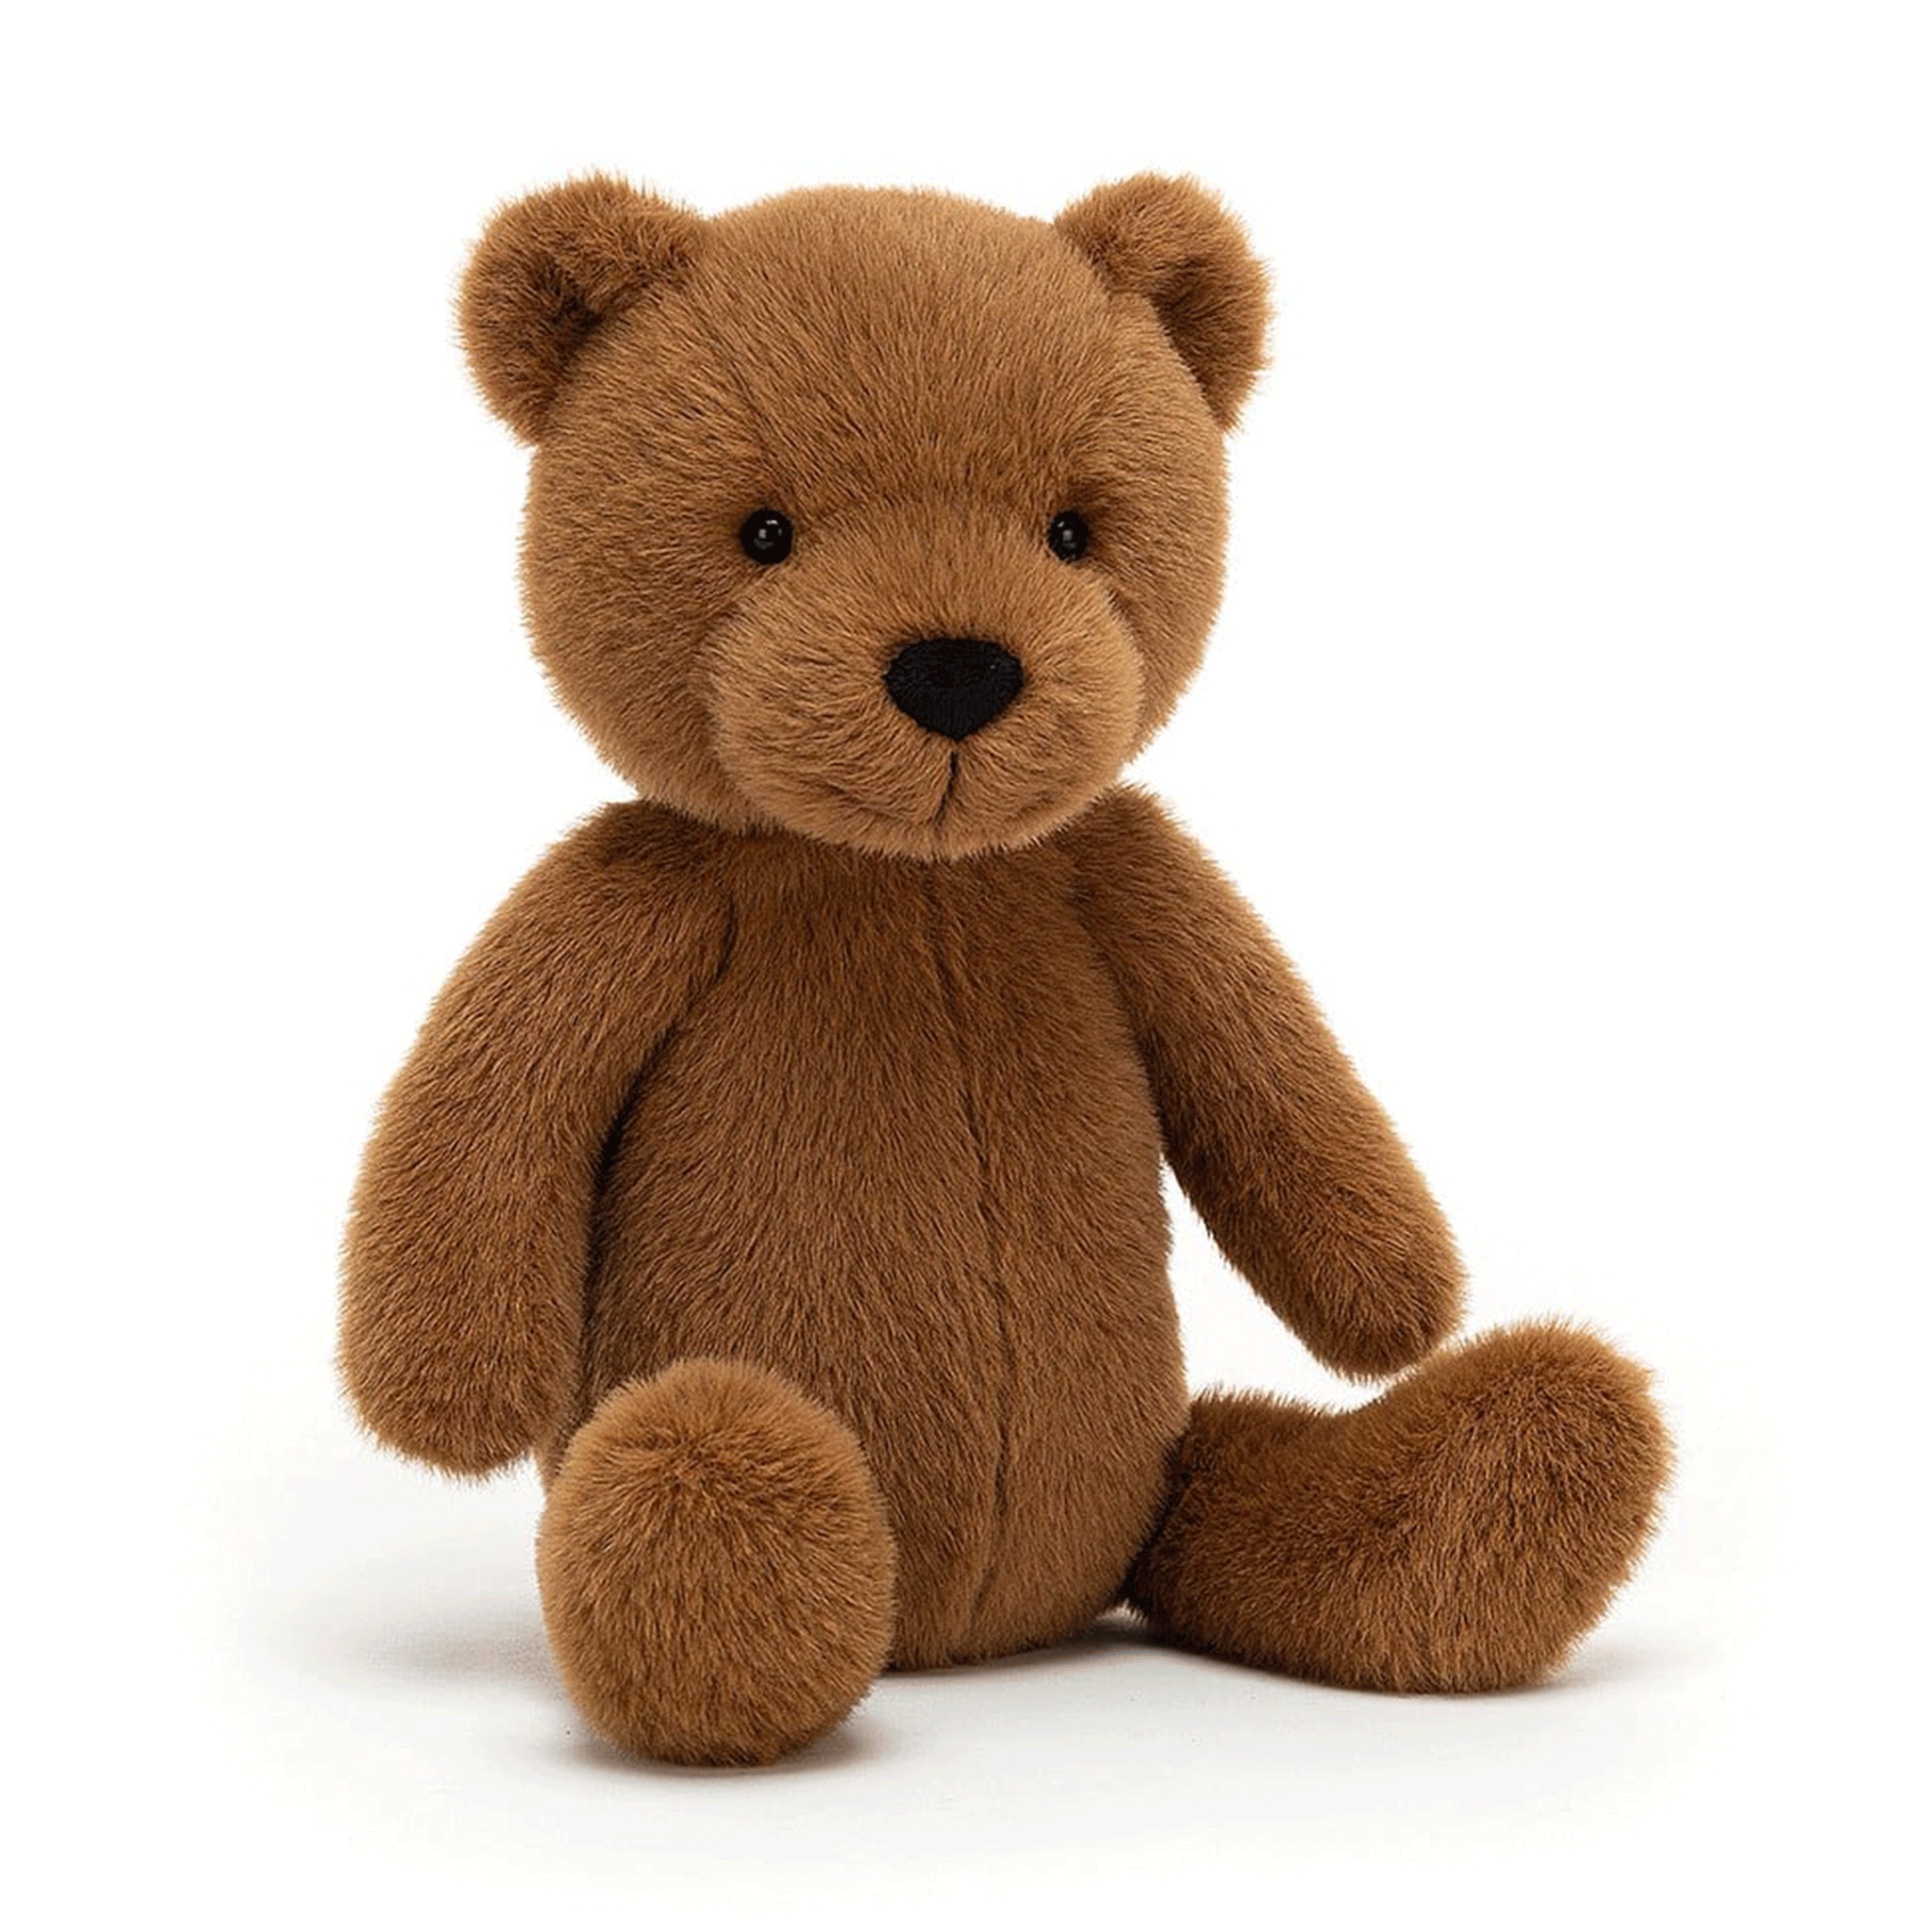 On a white background is a brown stuffed toy bear. 